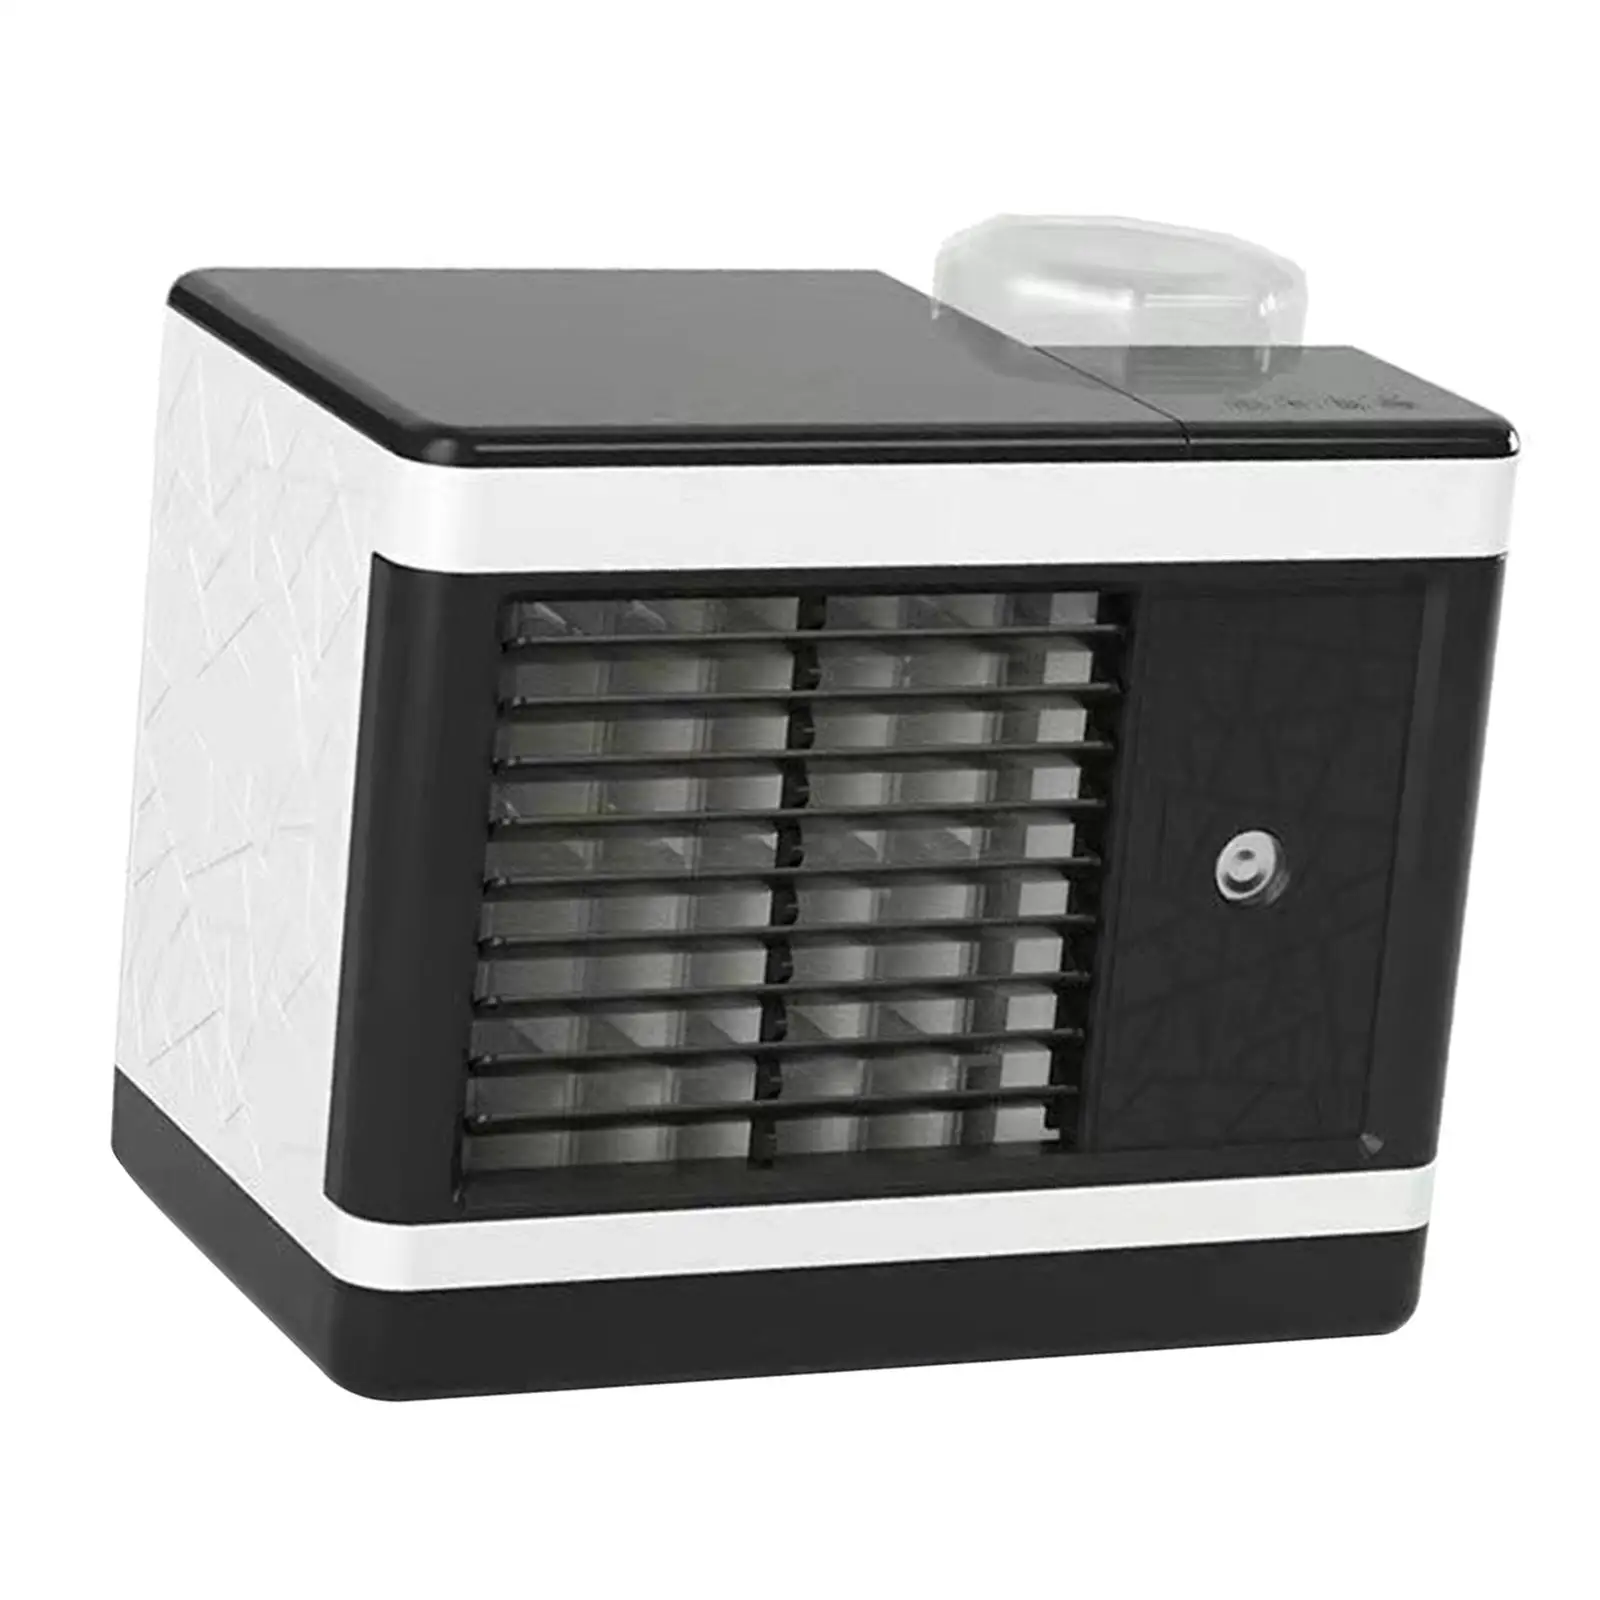 Portable Air Conditioning Fan 3-Speed Mini Air Conditioner Anion Purifier Humidifier Desktop USB Air Cooling Fan Air Cooler